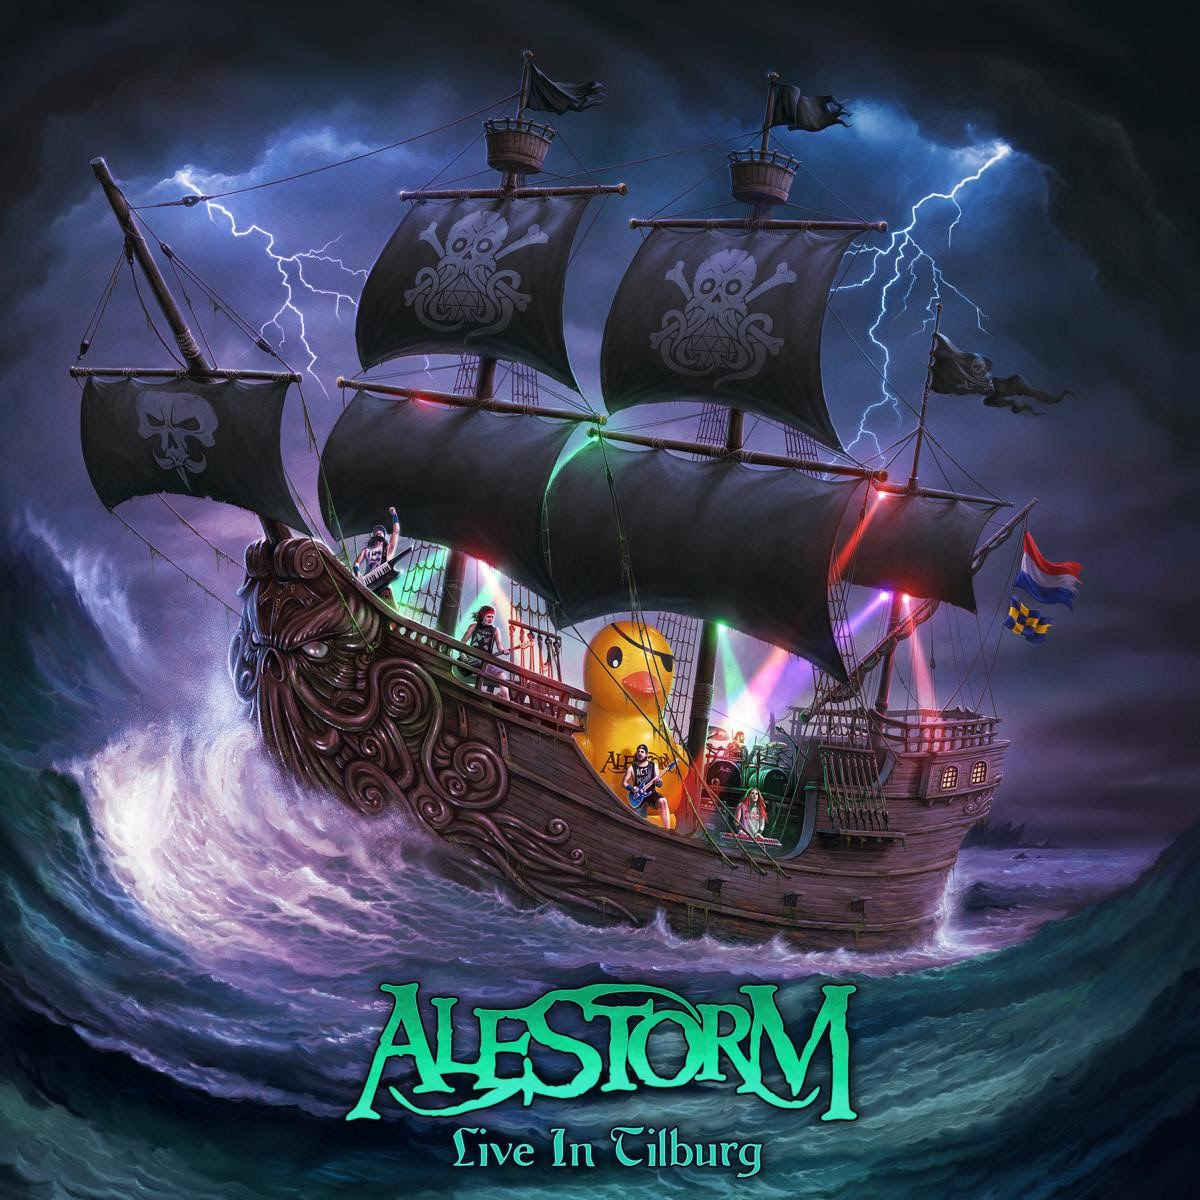 ALESTORM to Release New Live Album & DVD/BluRay, Live in Tilburg, on May 28!